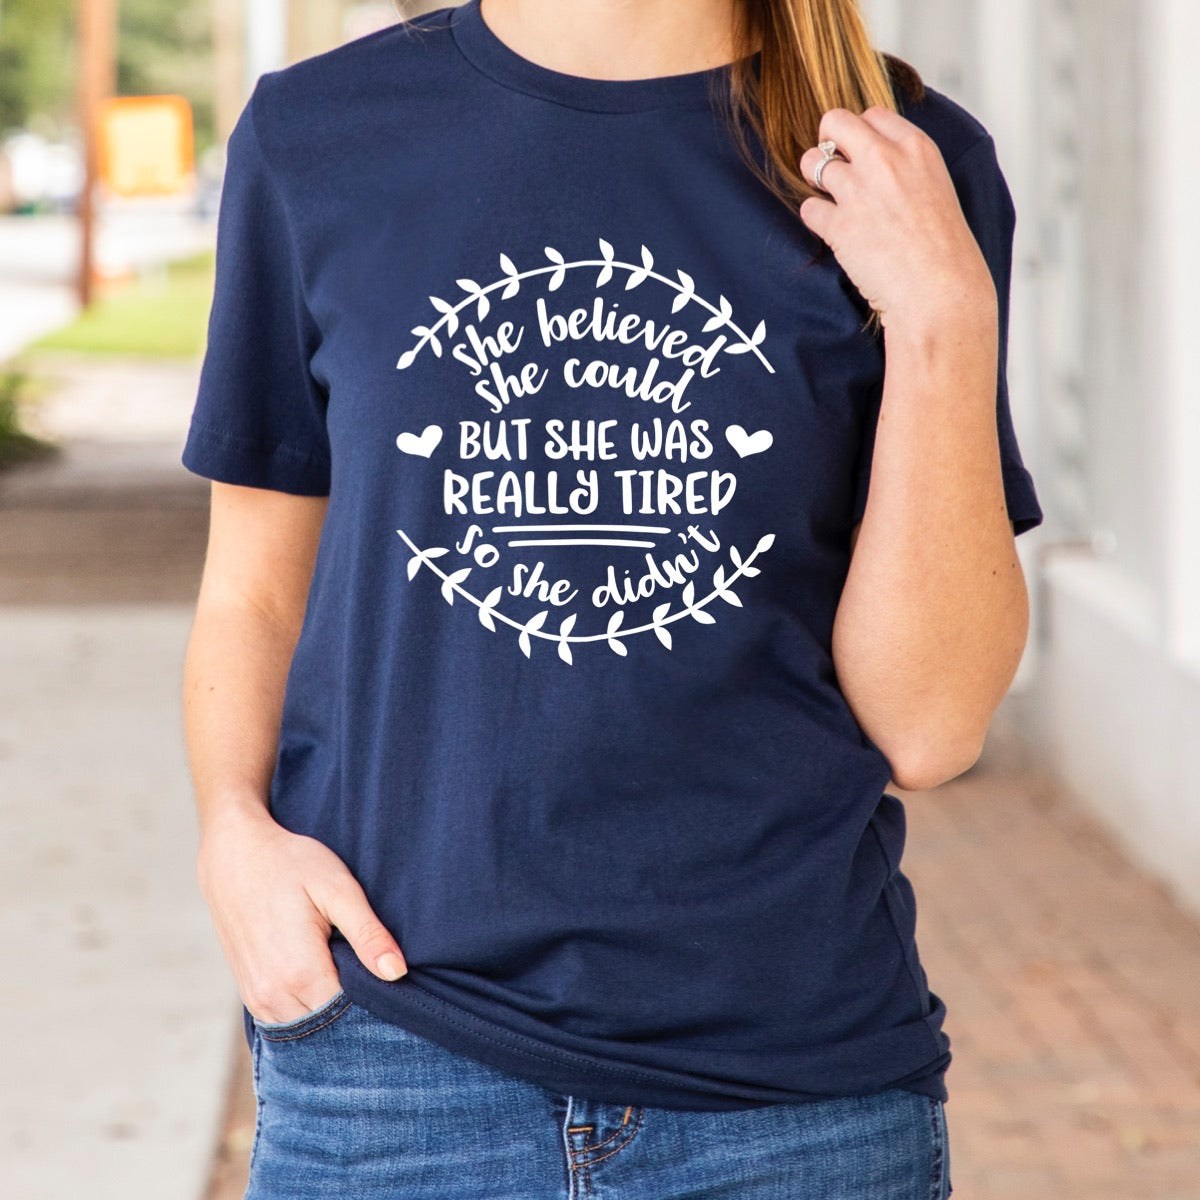 She believe she could-Gildan Softstyle Navy- FINISHED TEE* Ships 4-6 business days